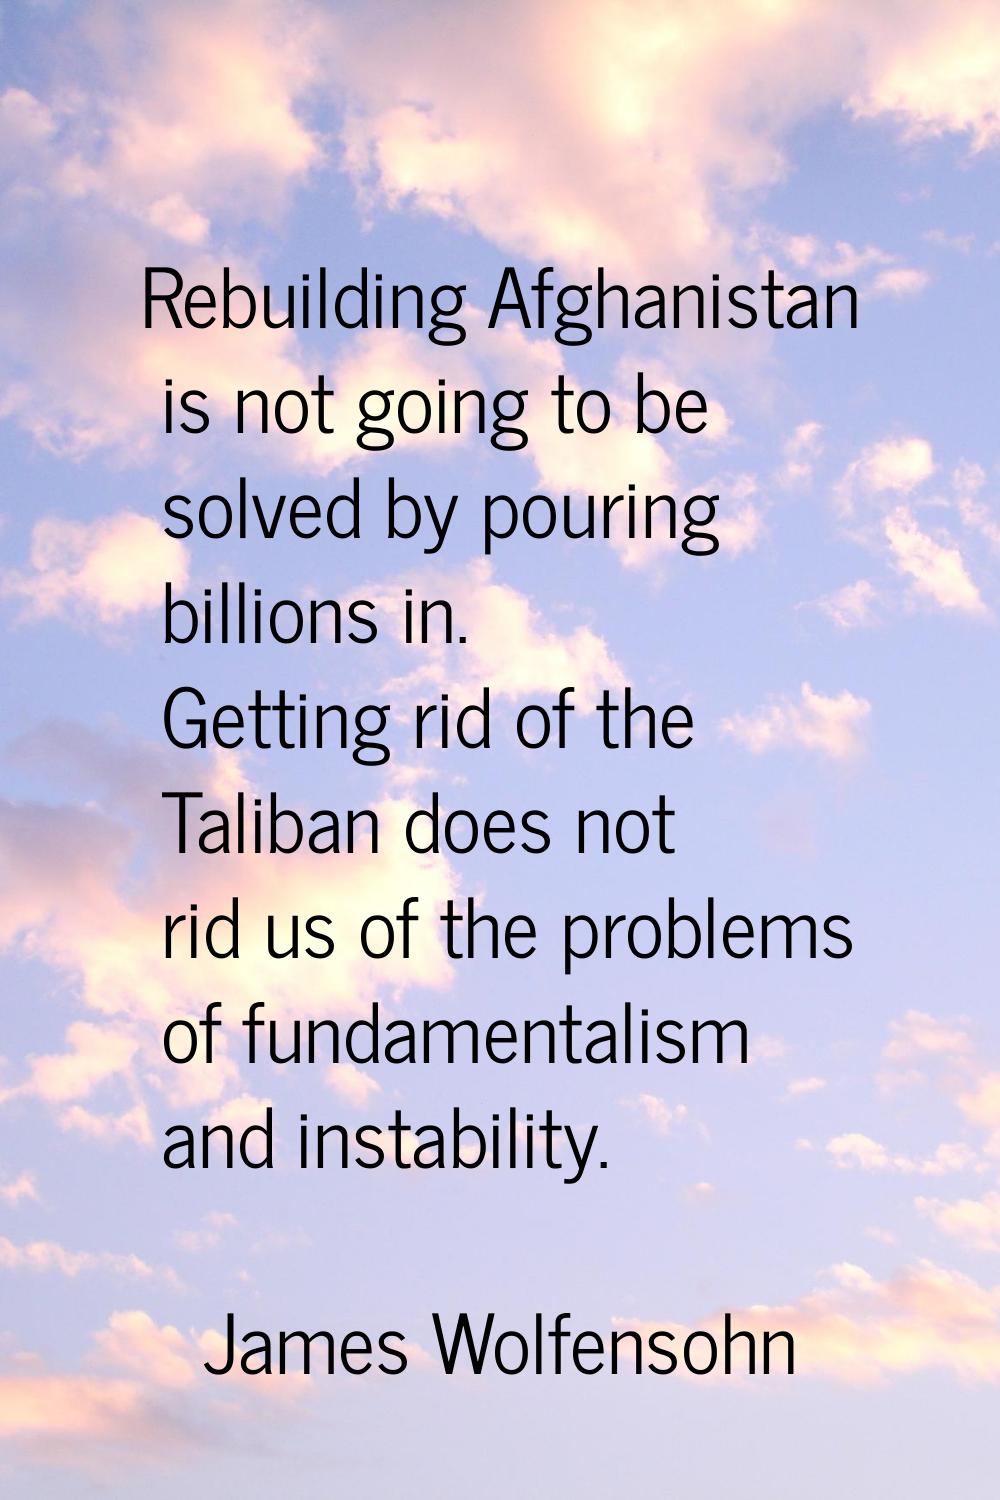 Rebuilding Afghanistan is not going to be solved by pouring billions in. Getting rid of the Taliban